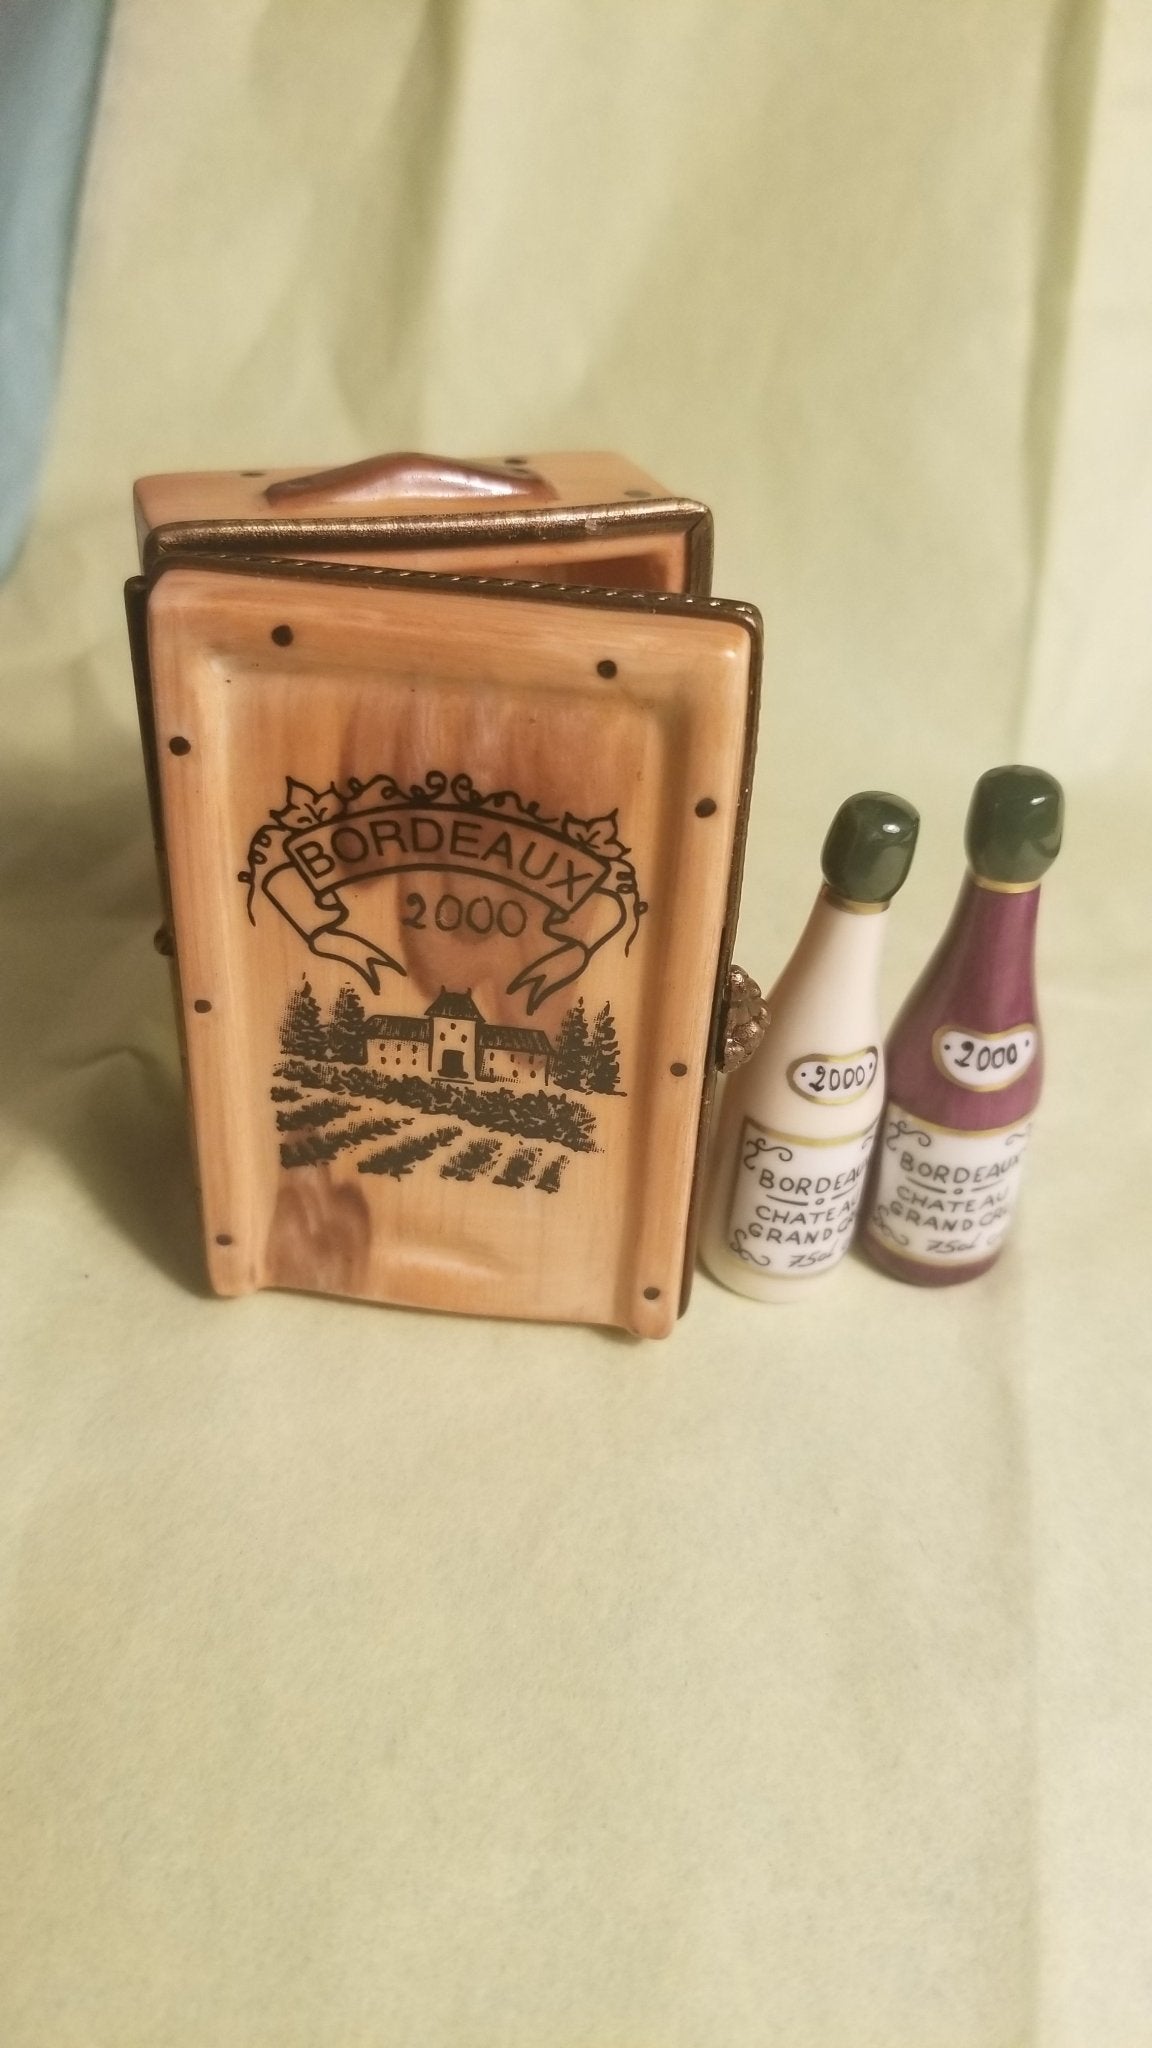 Ornate Bordeaux Crate for two wine bottles - 1 of 1000